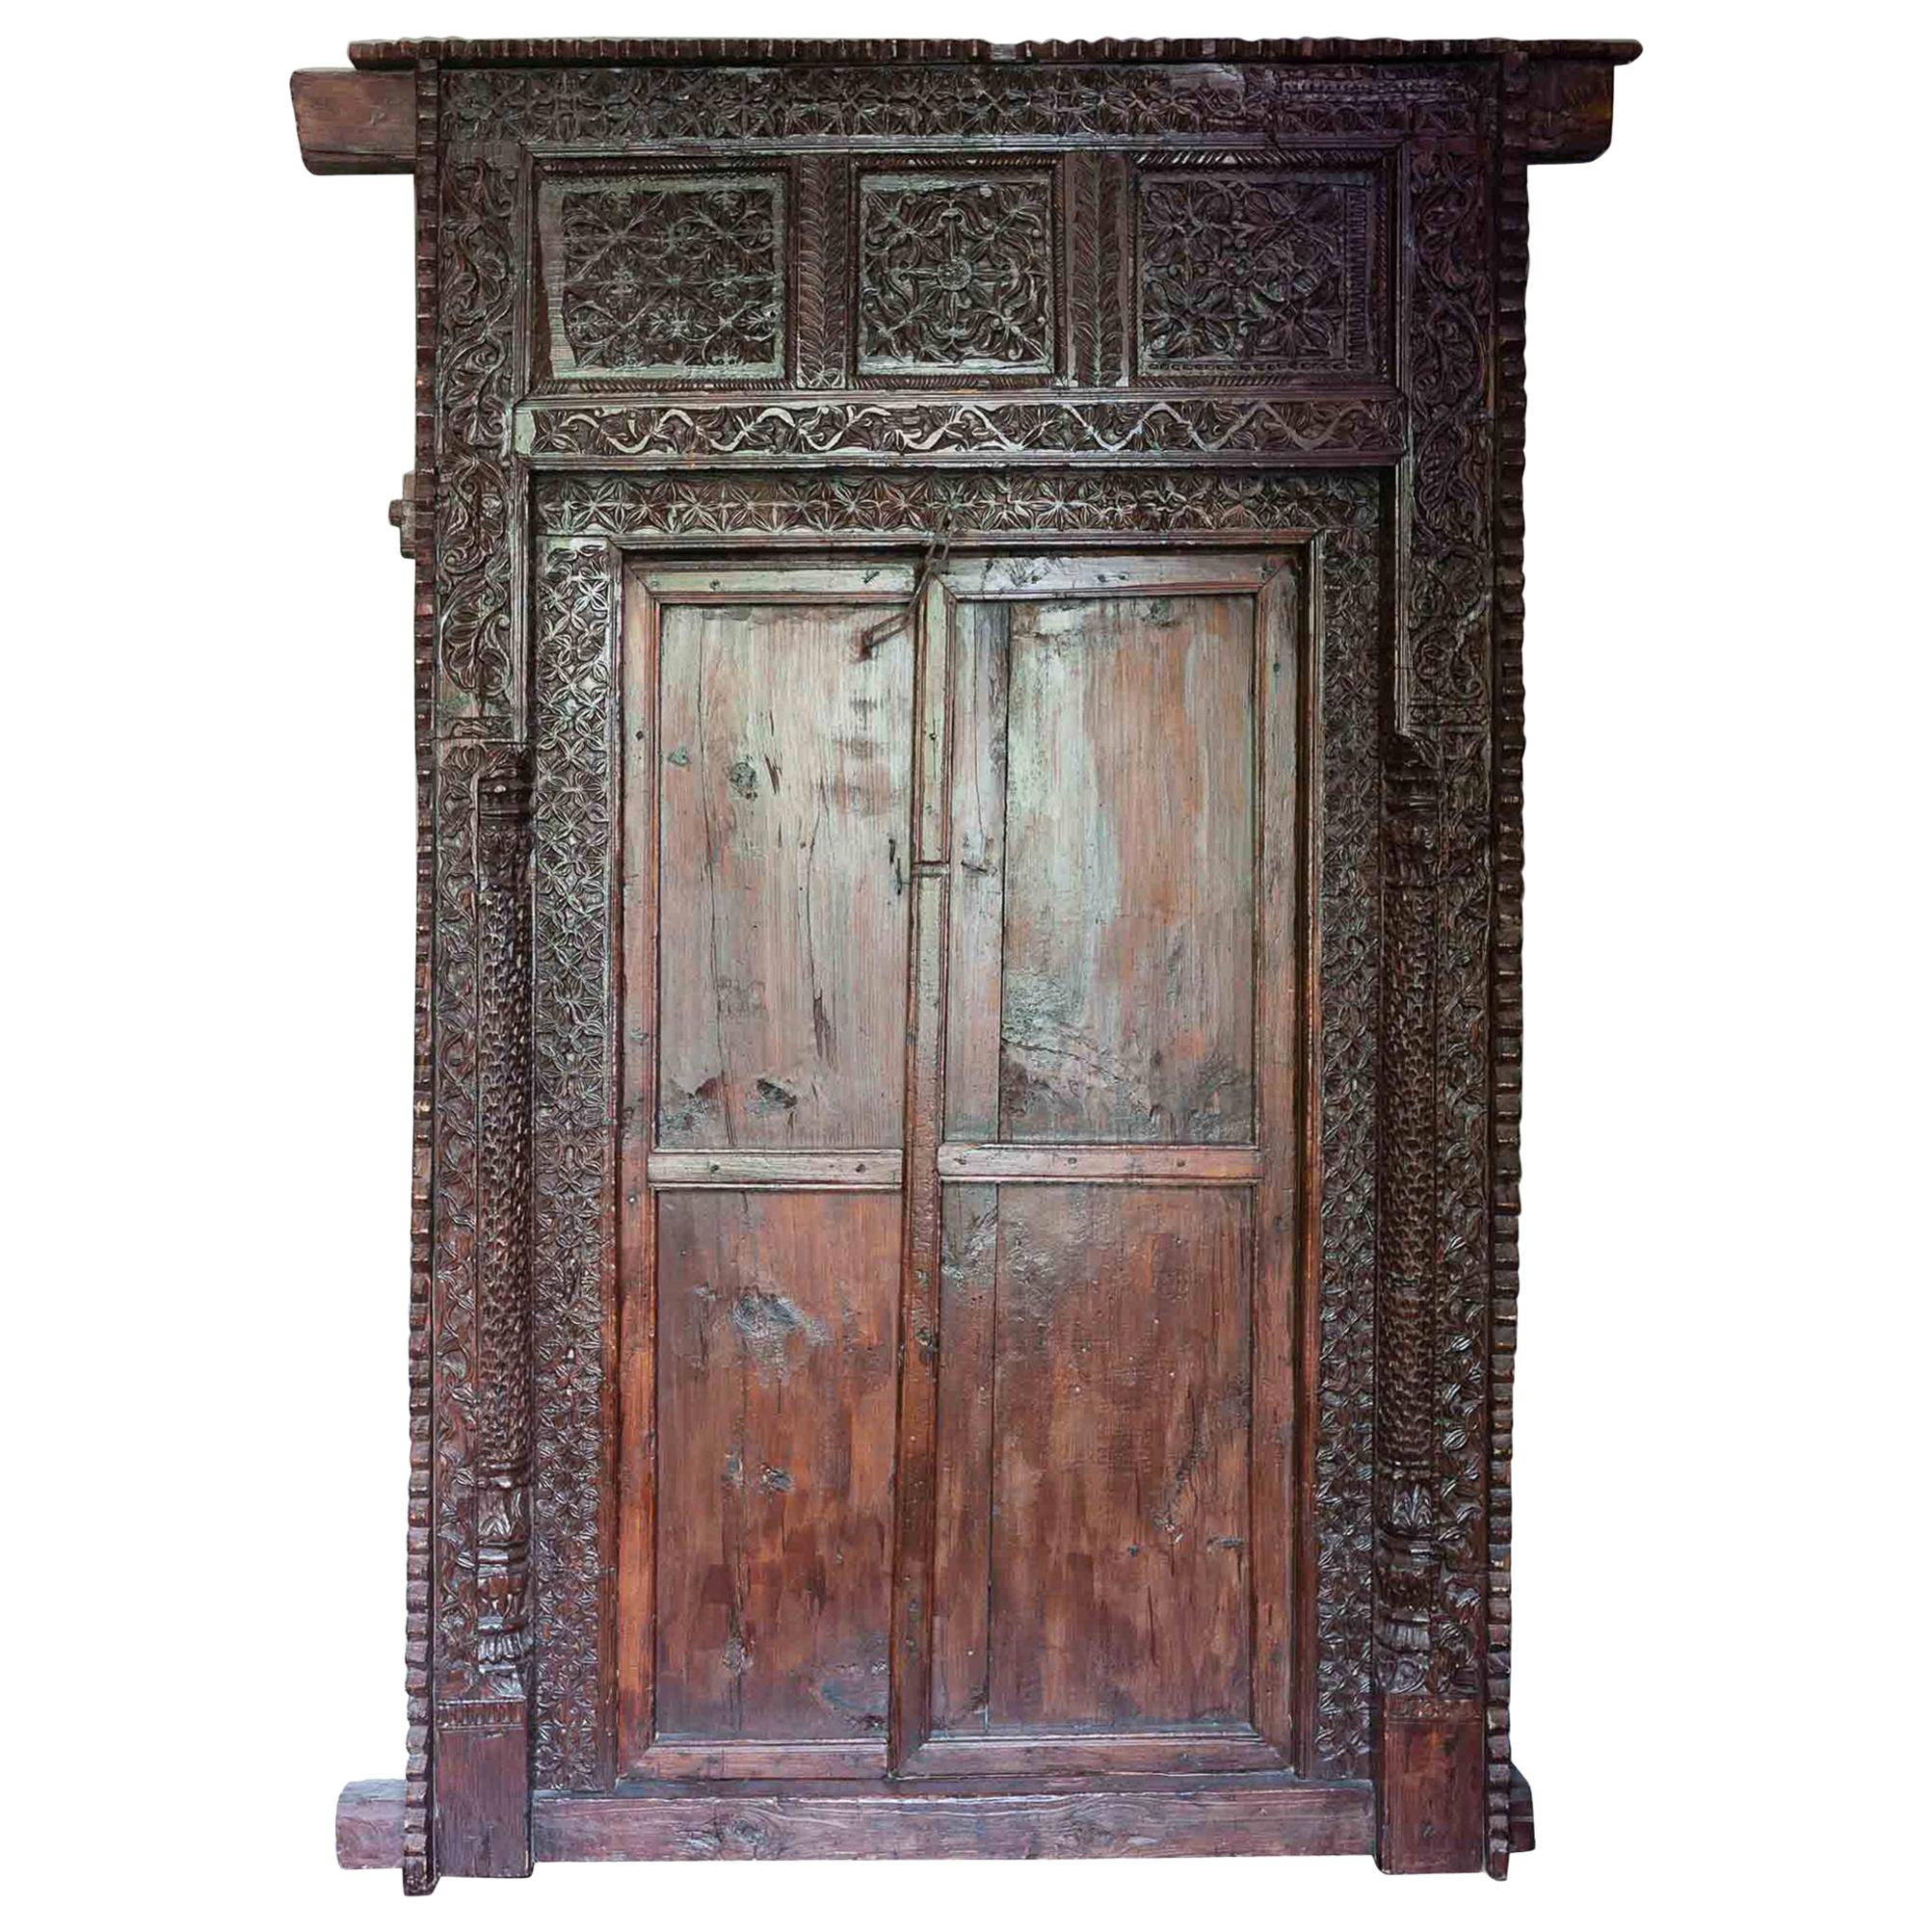 Antique Indian Ornately Carved Wooden Doors and Surrounding Frame